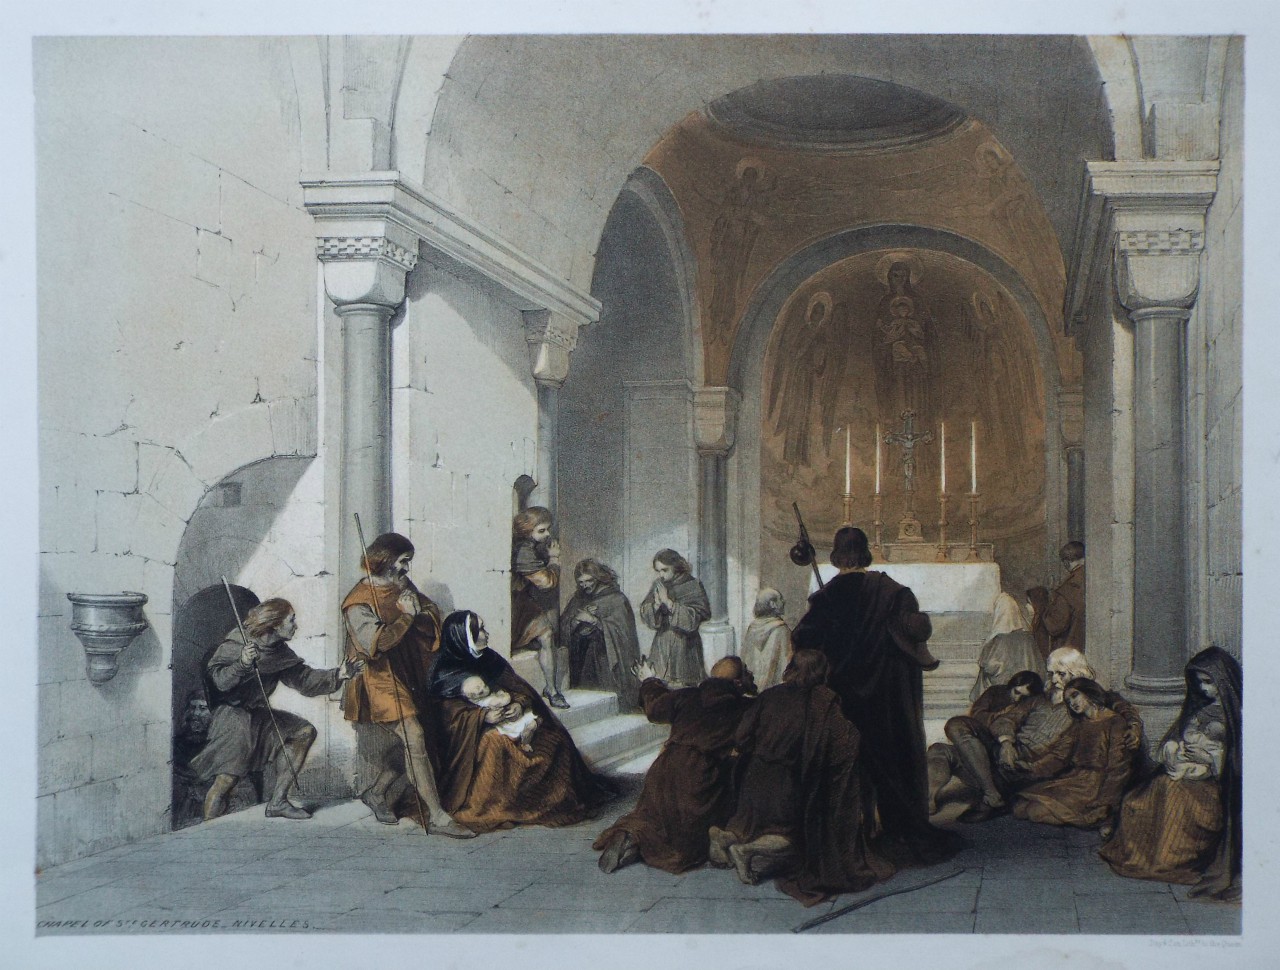 Lithograph - Chapel of St. Gertrude - Nivelles. - Haghe